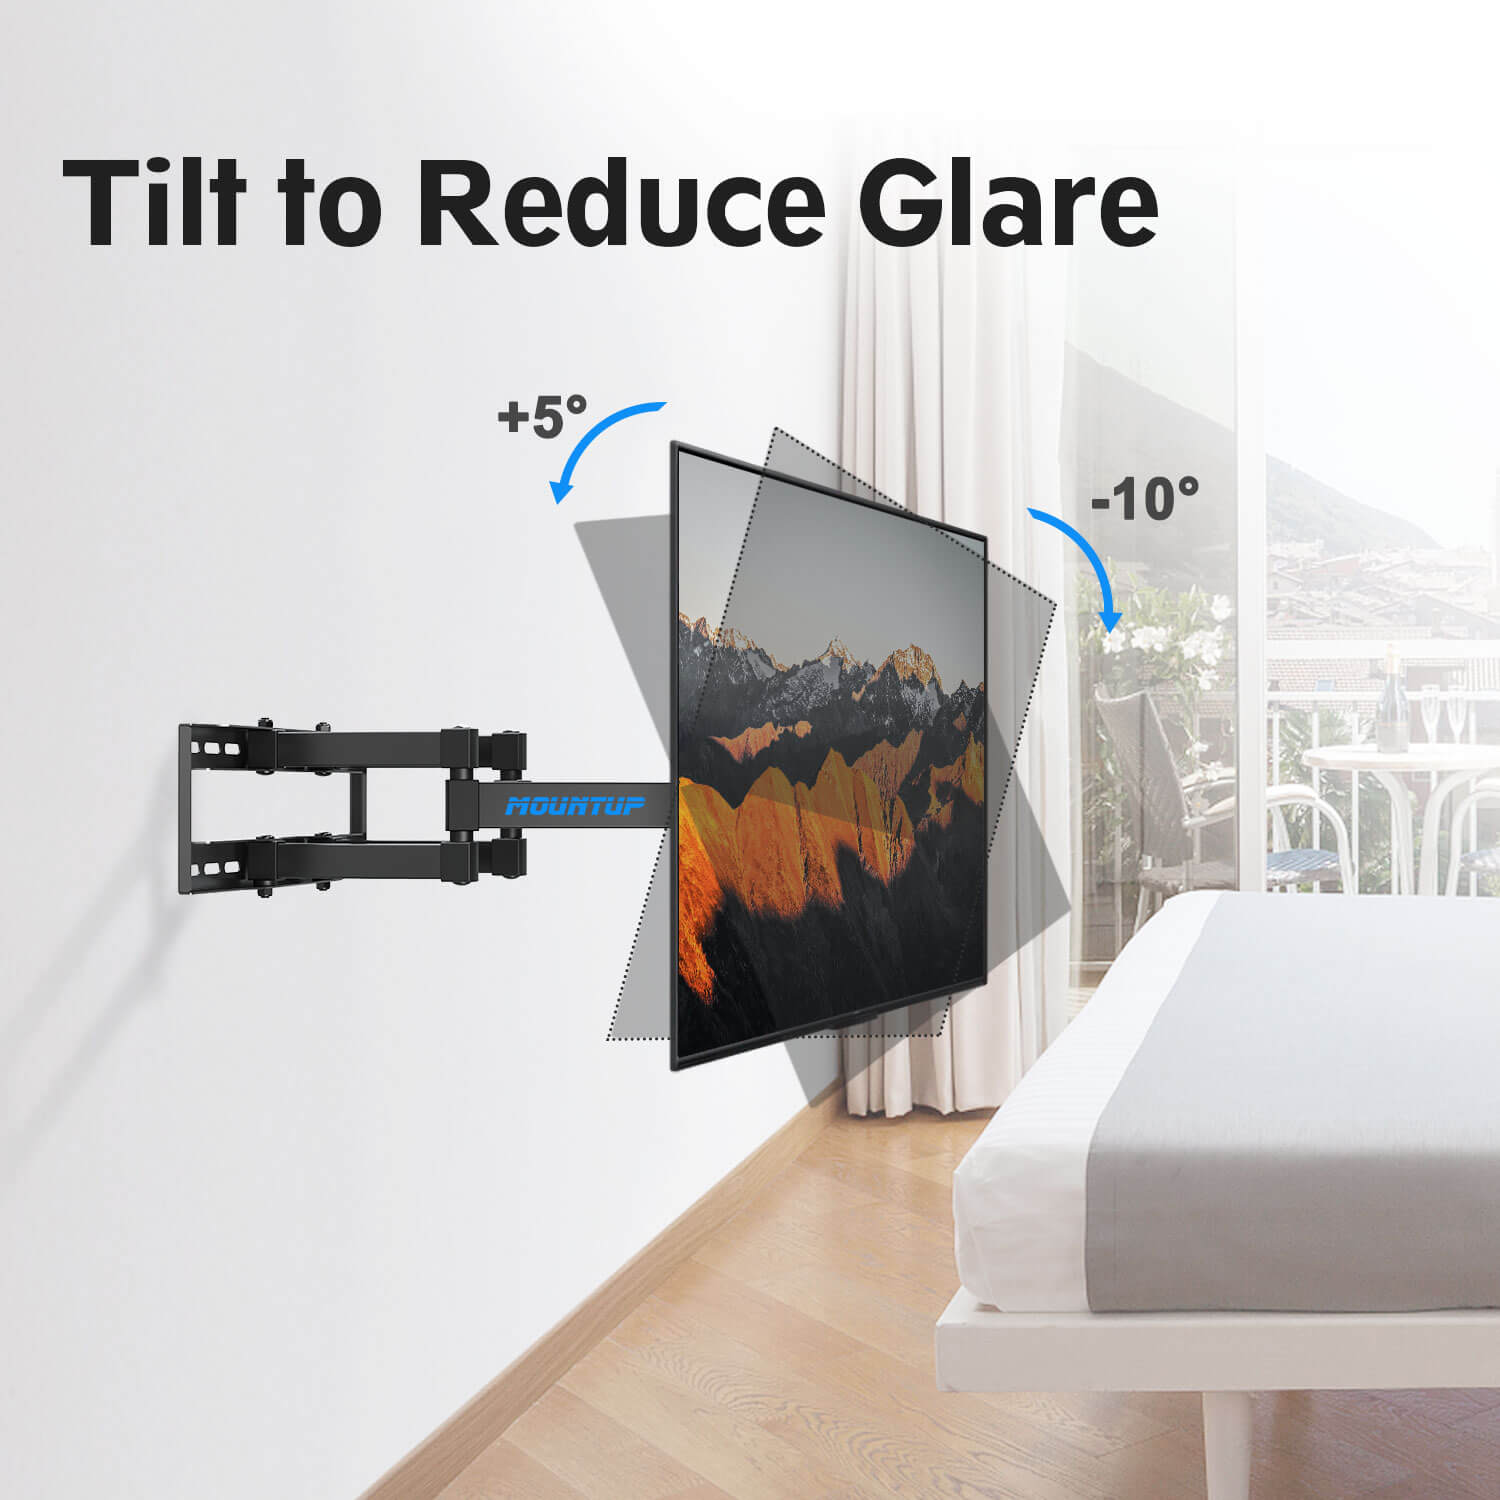 swivel wall mount tilts down to reduce glare